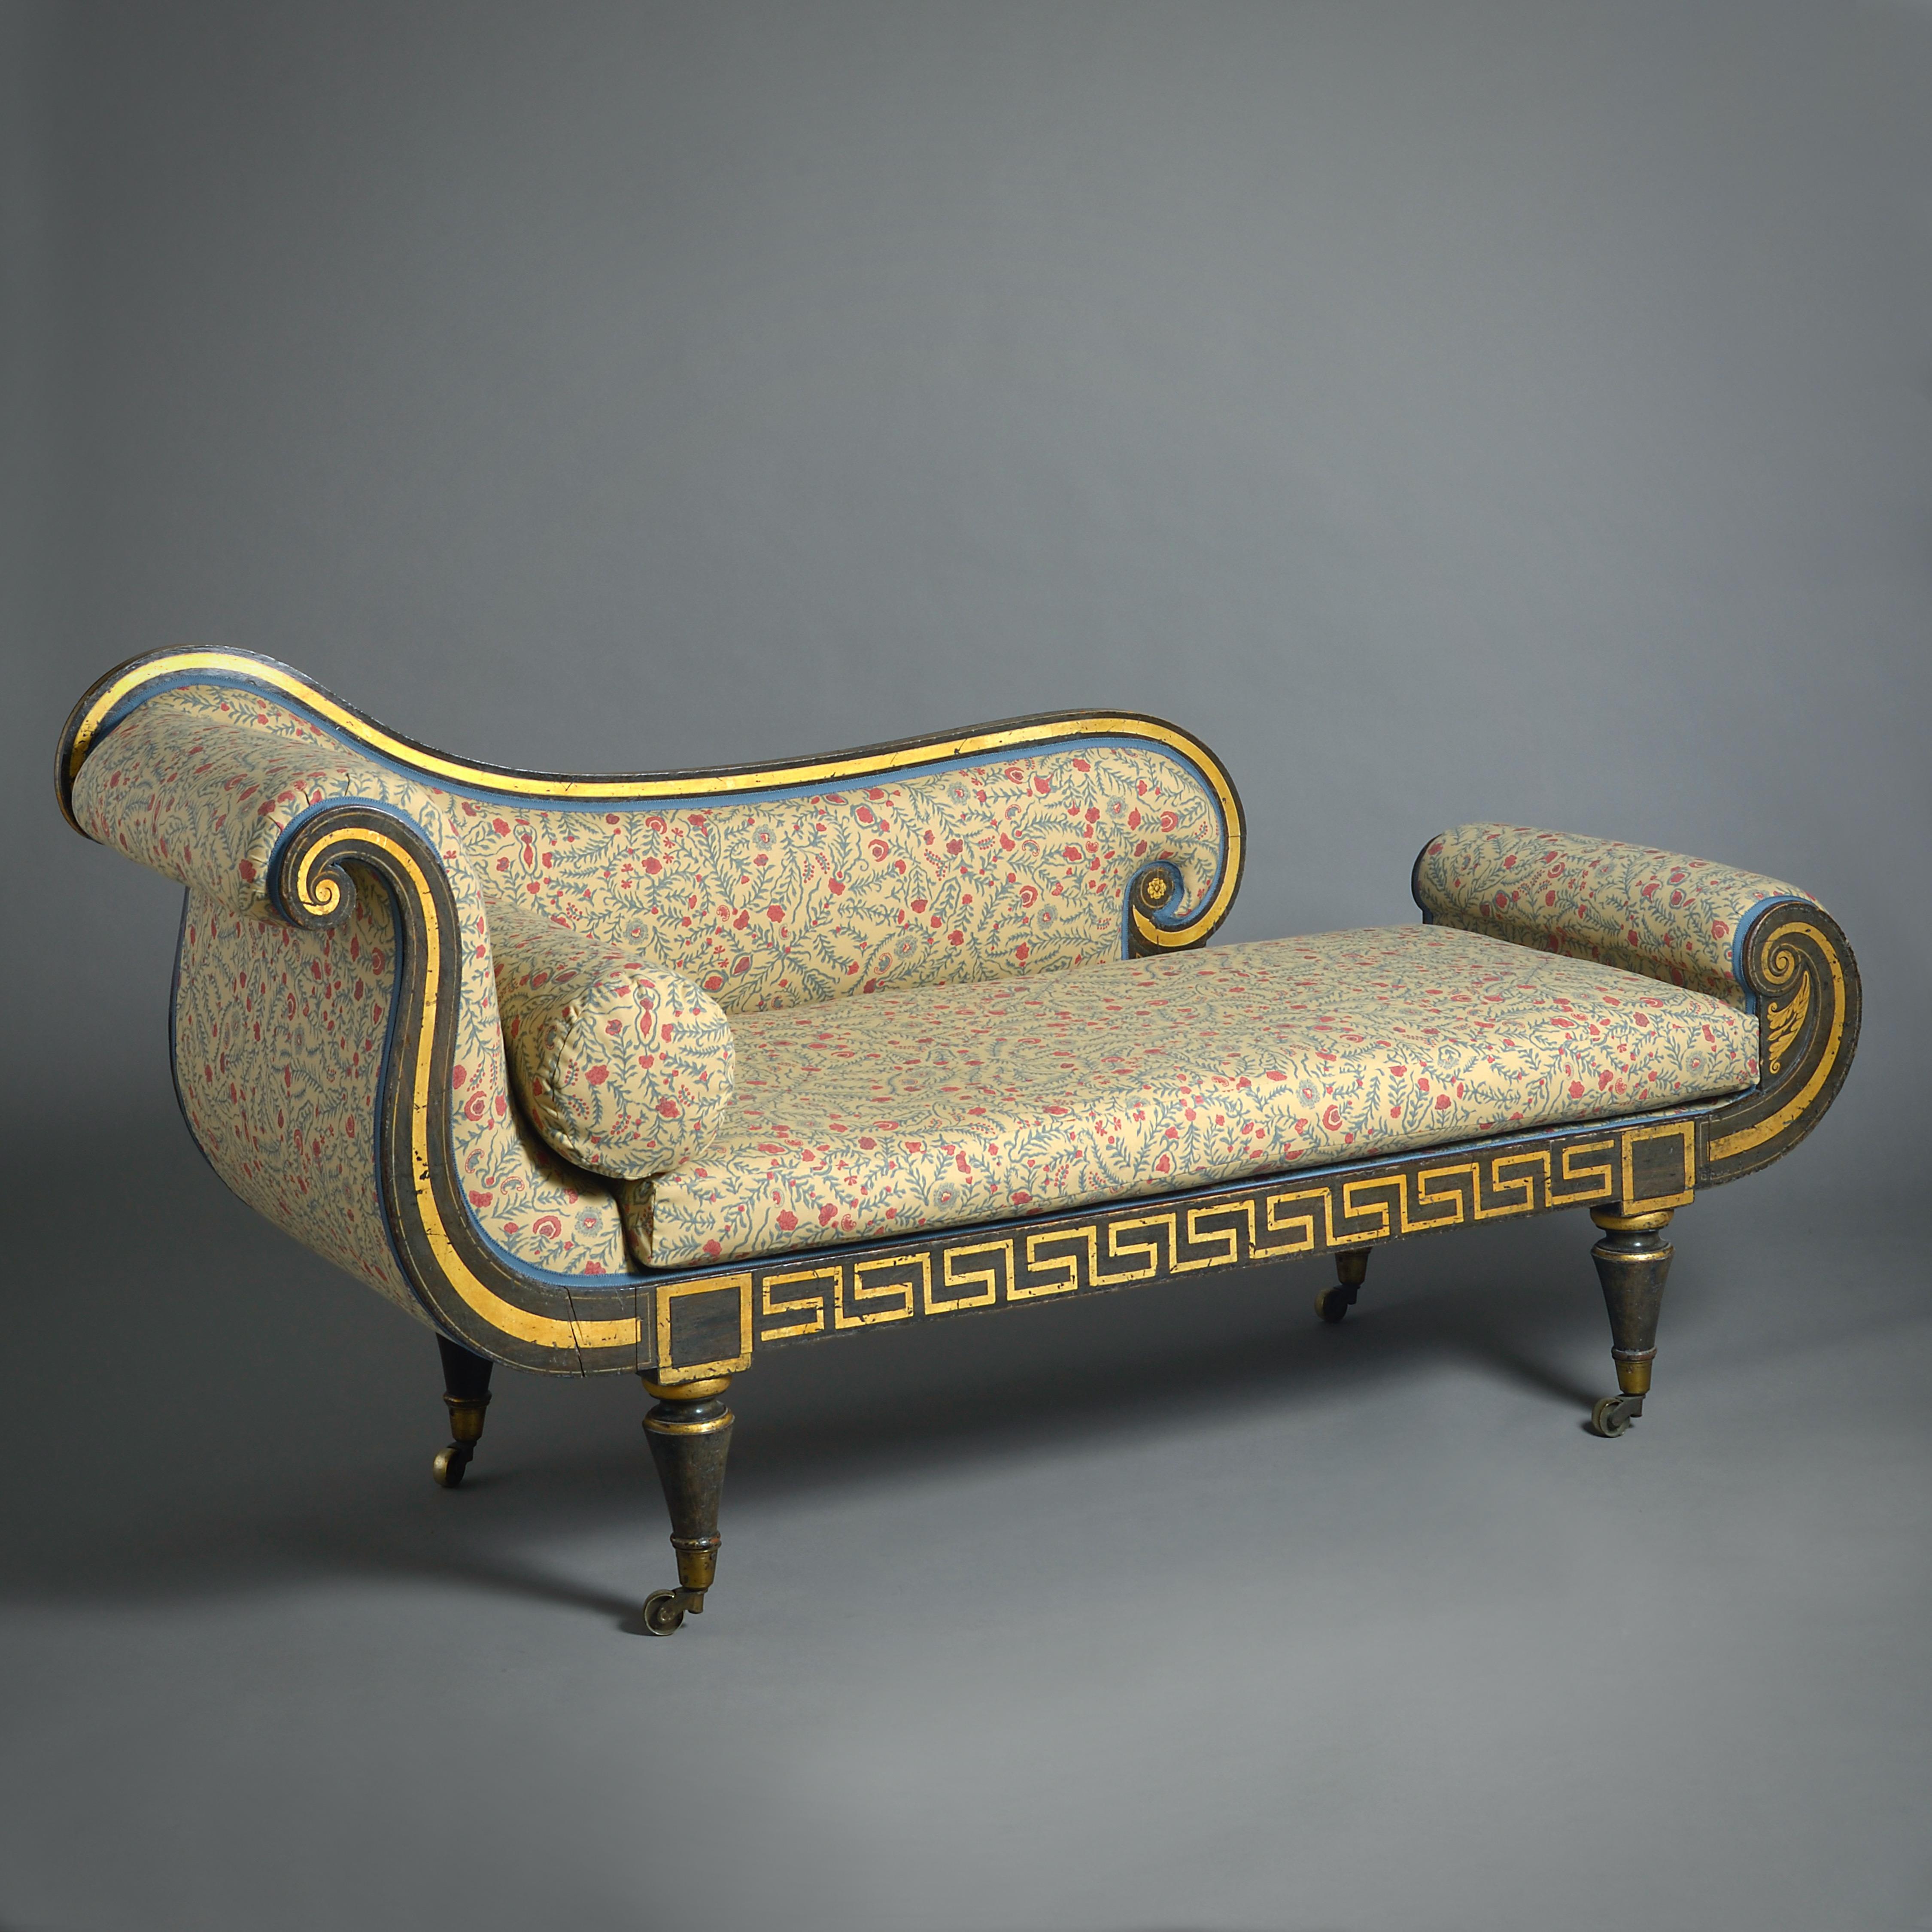 A FINE PAIR OF REGENCY GRAINED AND PARCEL-GILT CHAISE LONGUES, CIRCA 1815.

Retaining their original decoration.